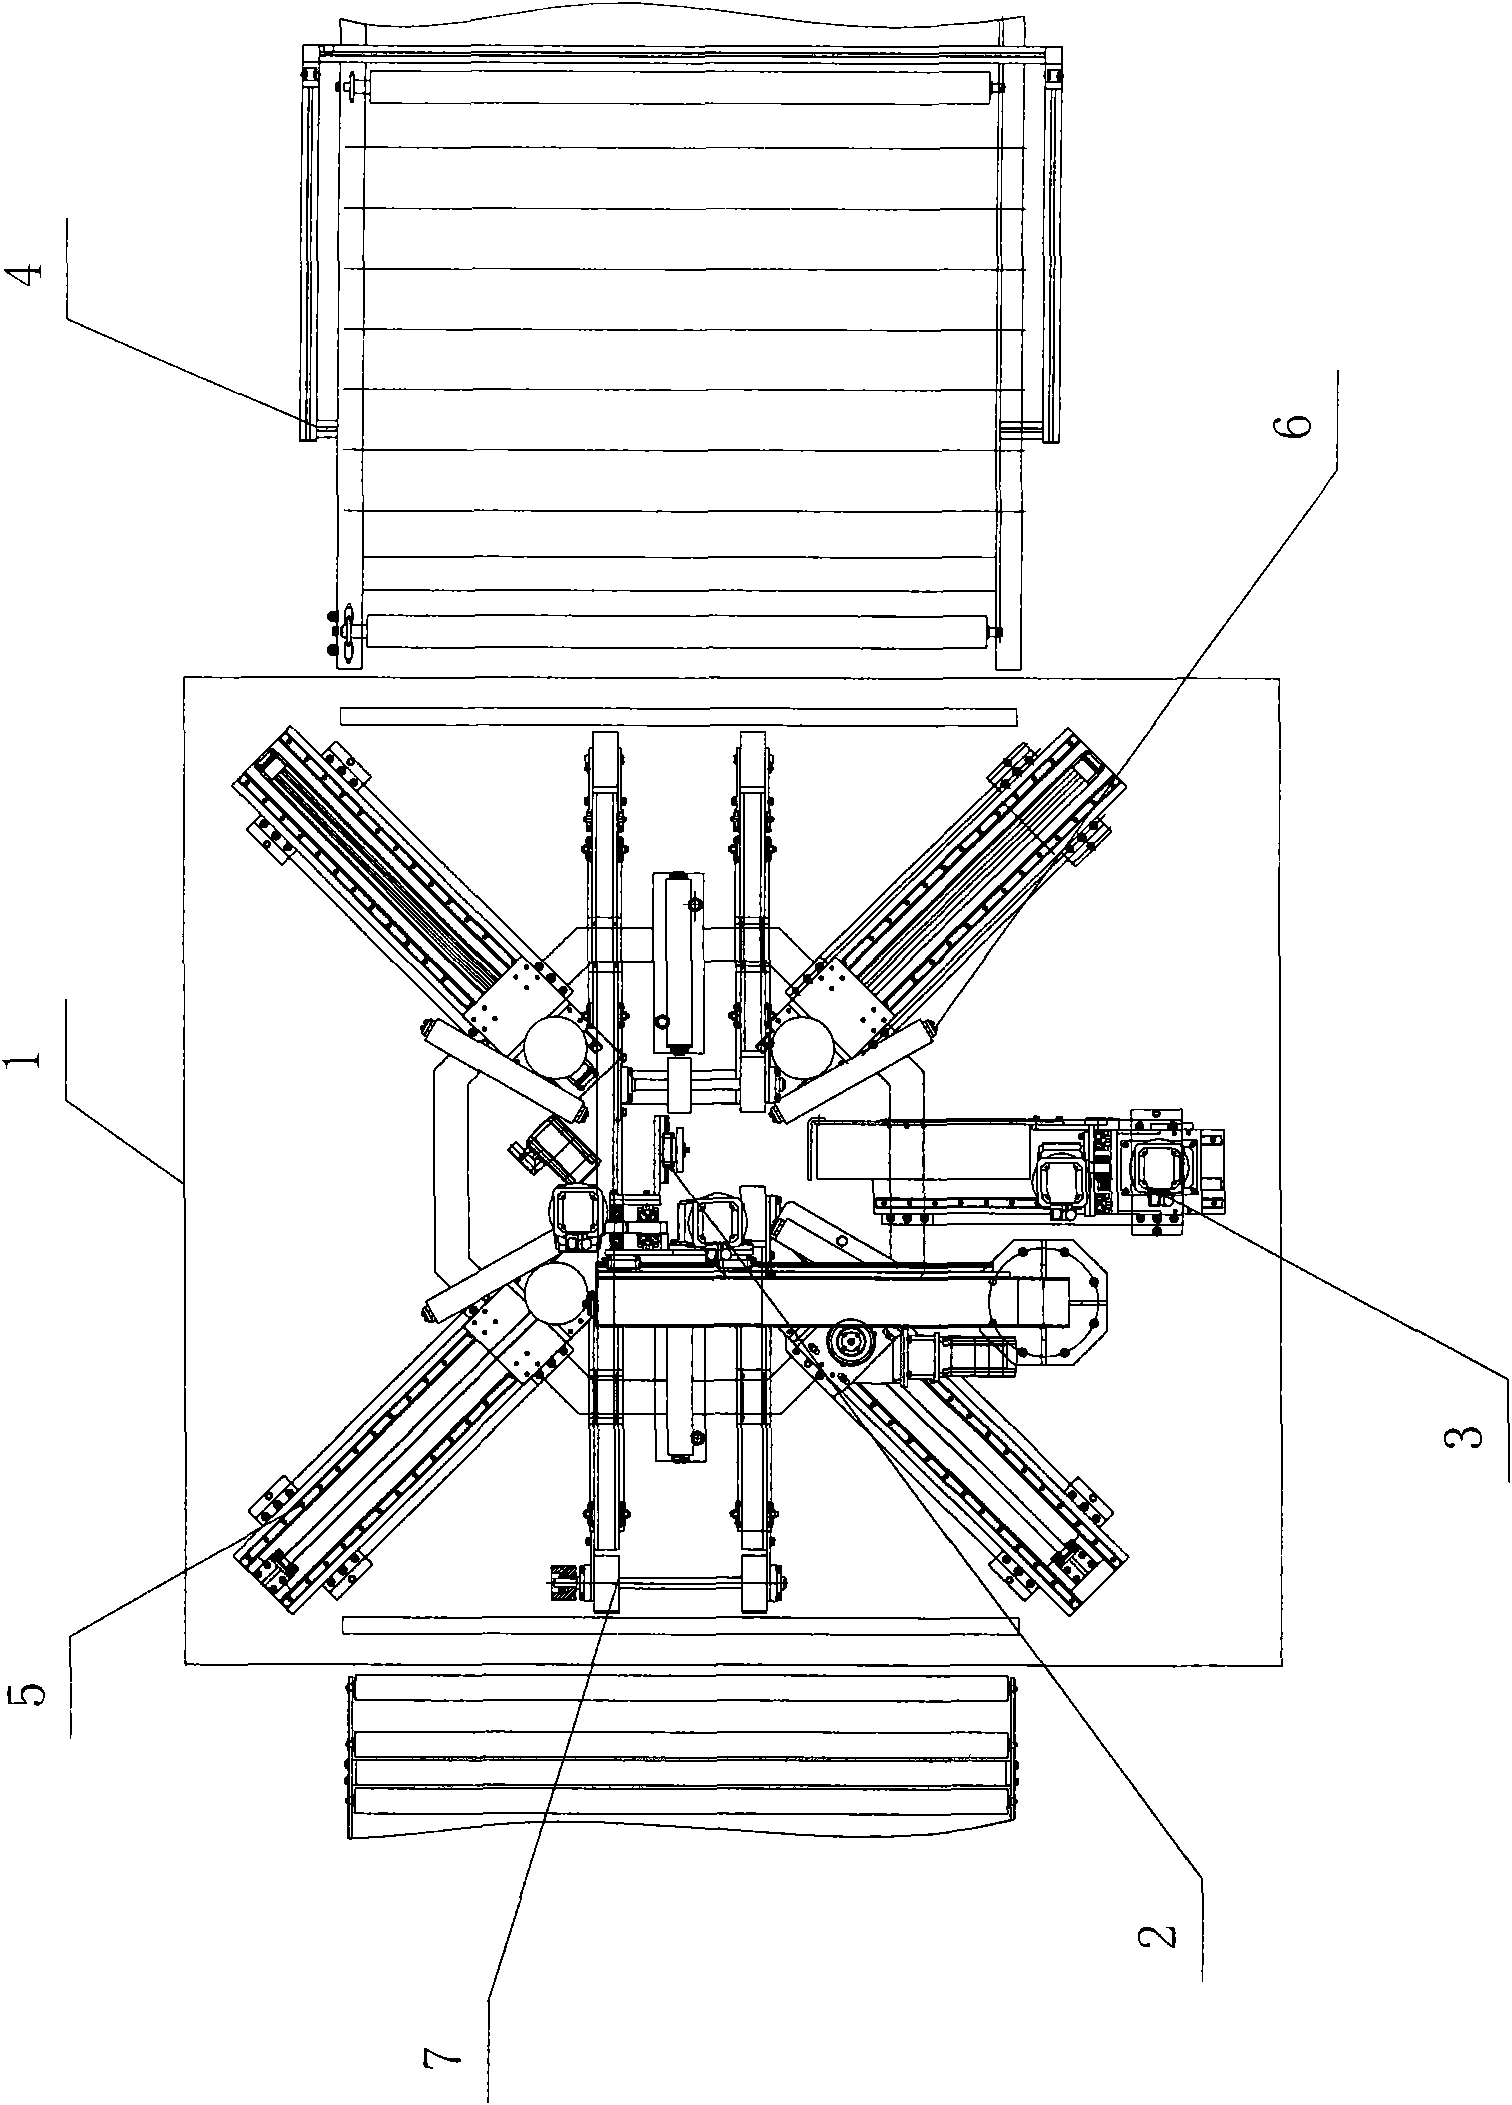 X-ray apparatus test device and method for truck tire